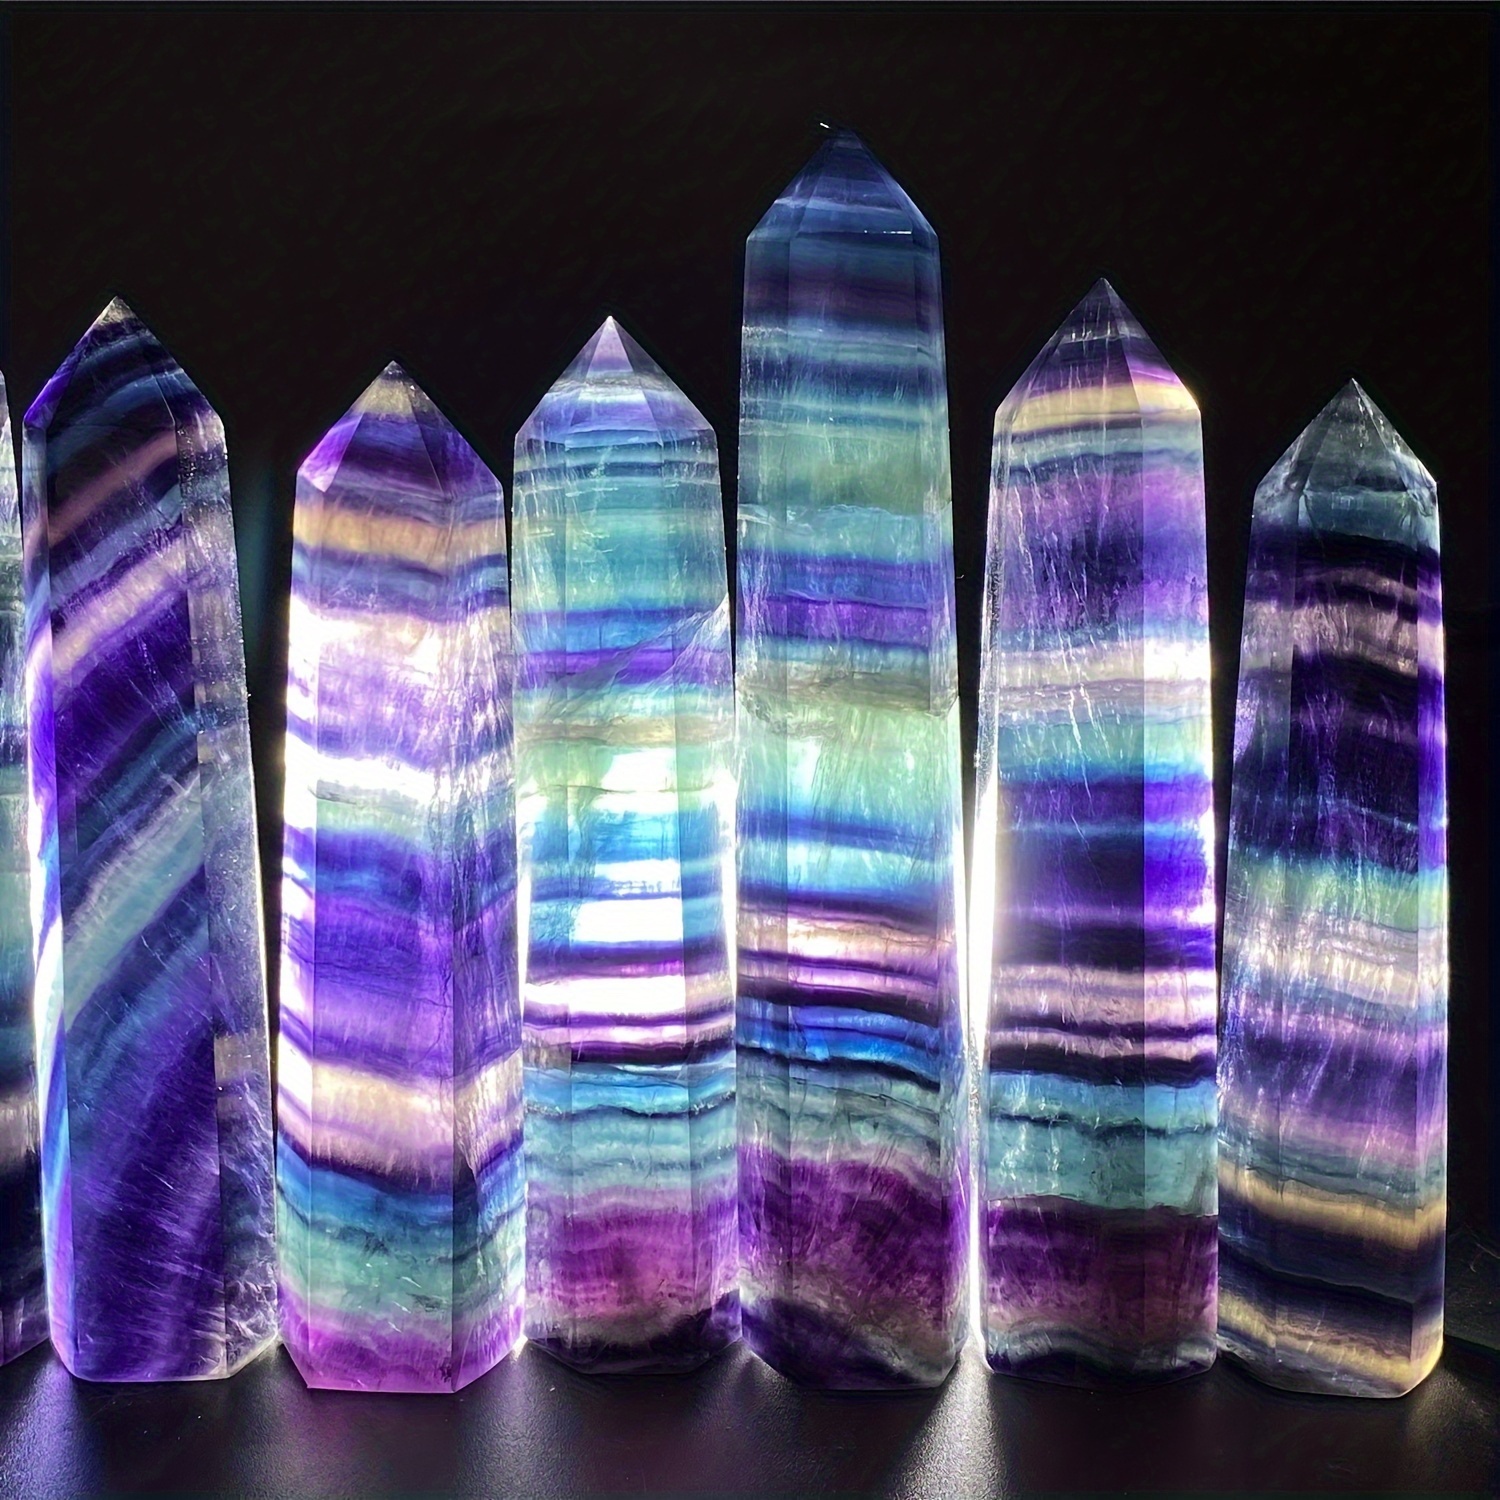 

1pc Rainbow Fluorite Point, Fluorite Crystal Tower Natural Rainbow Fluorite Crystal Stone, Colorful Crystals Stone Hexagonal Column, Crystal Wand Gift For Home Office